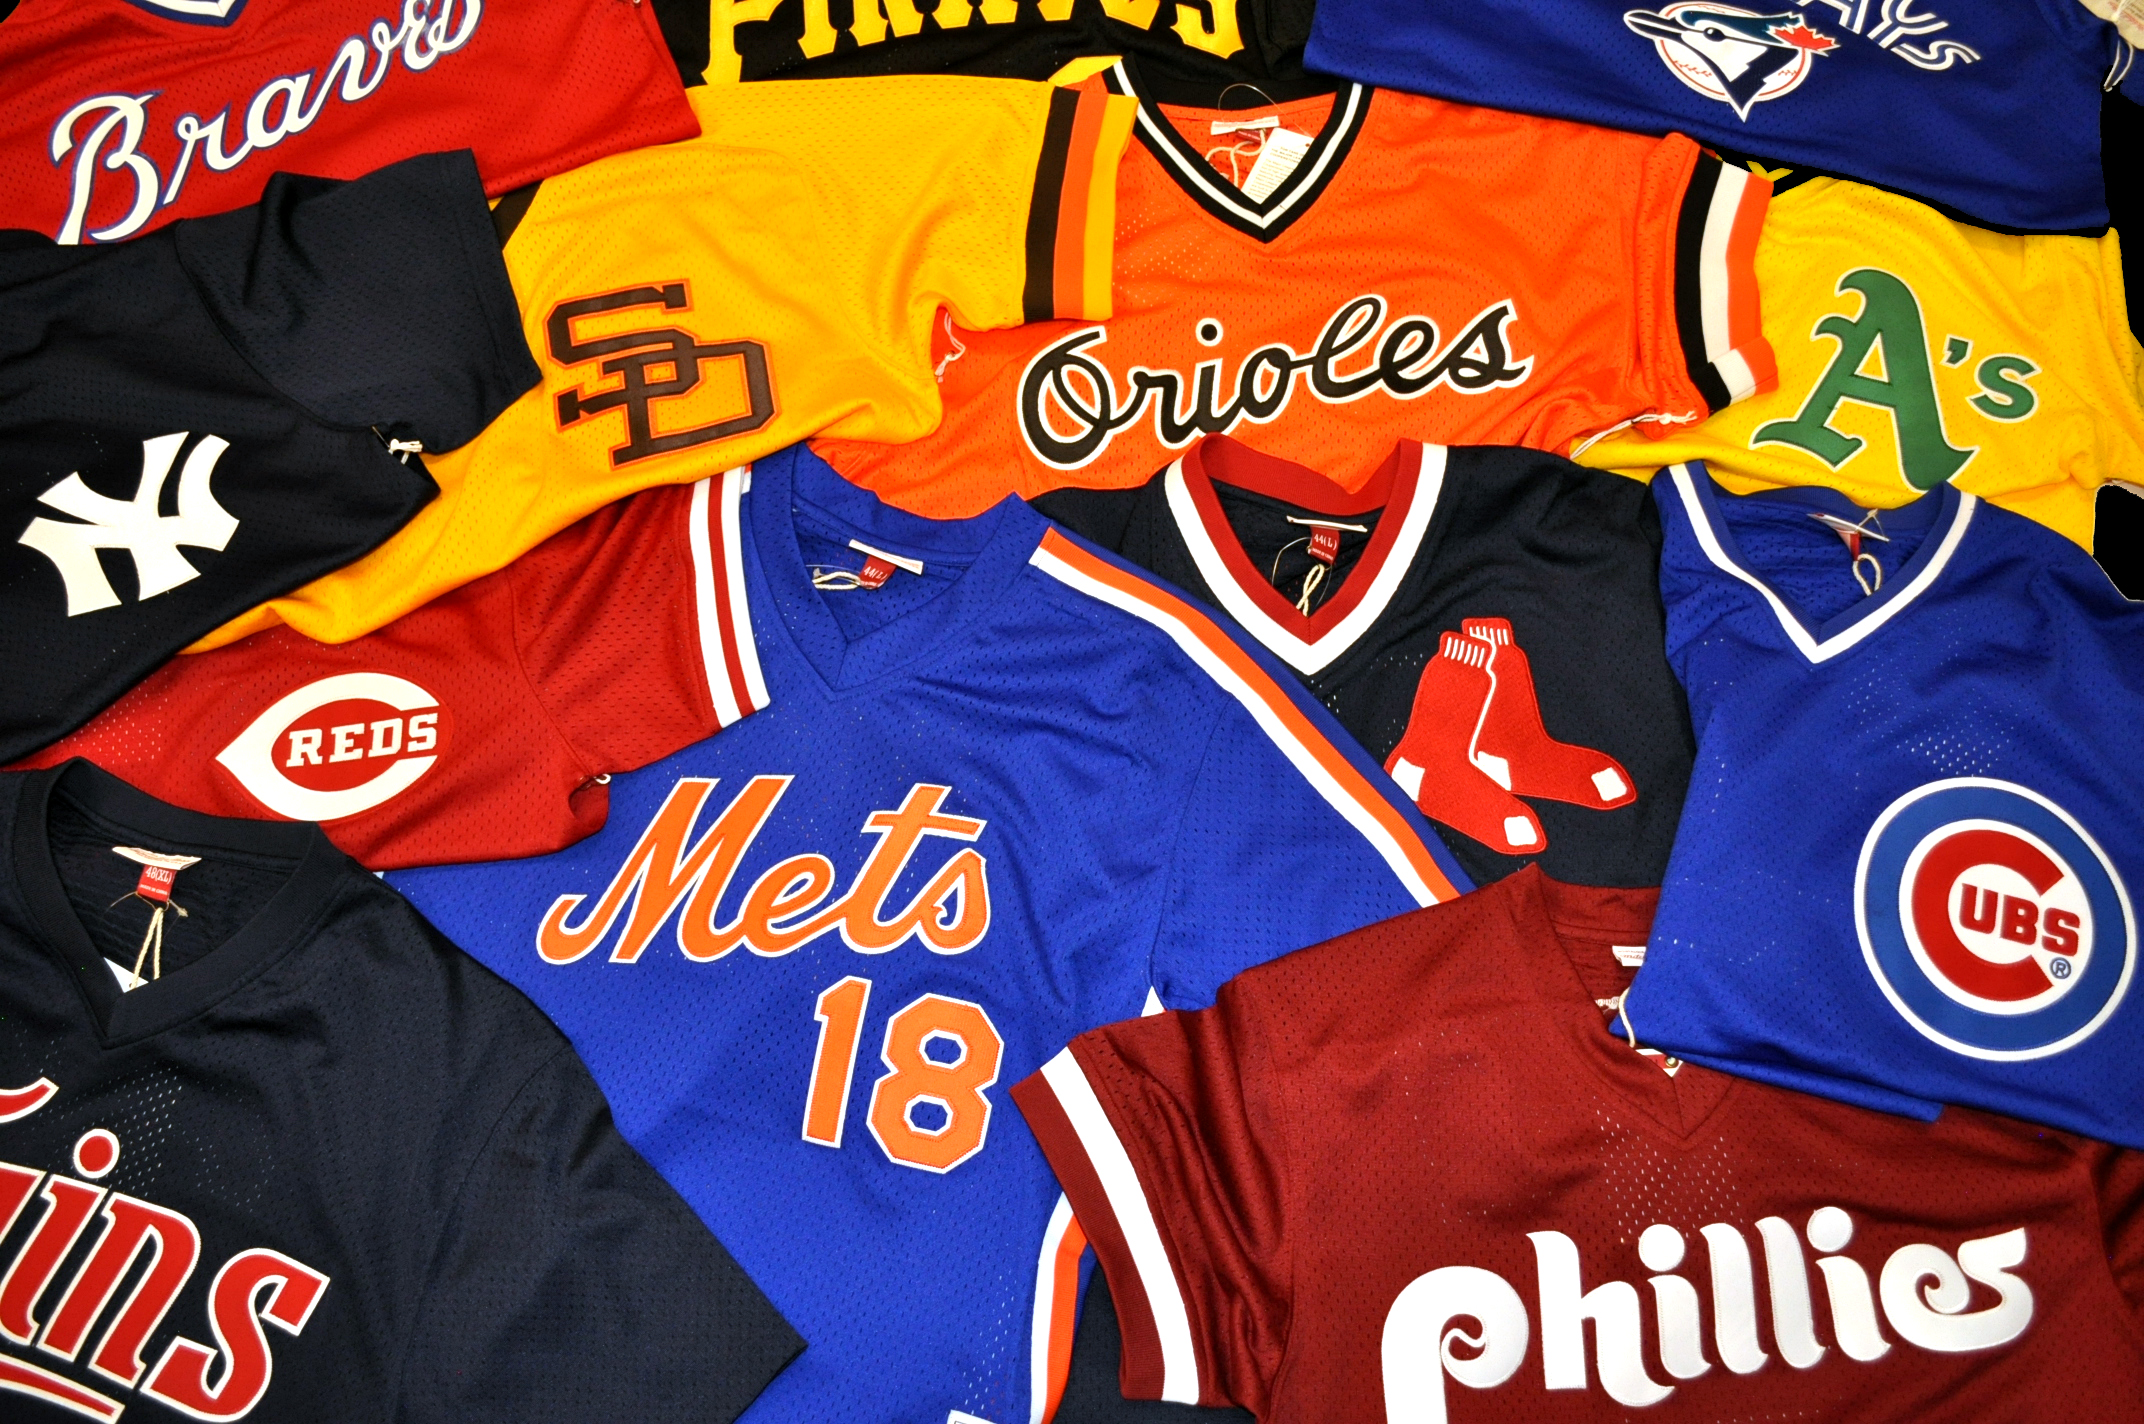 mitchell and ness throwback jerseys